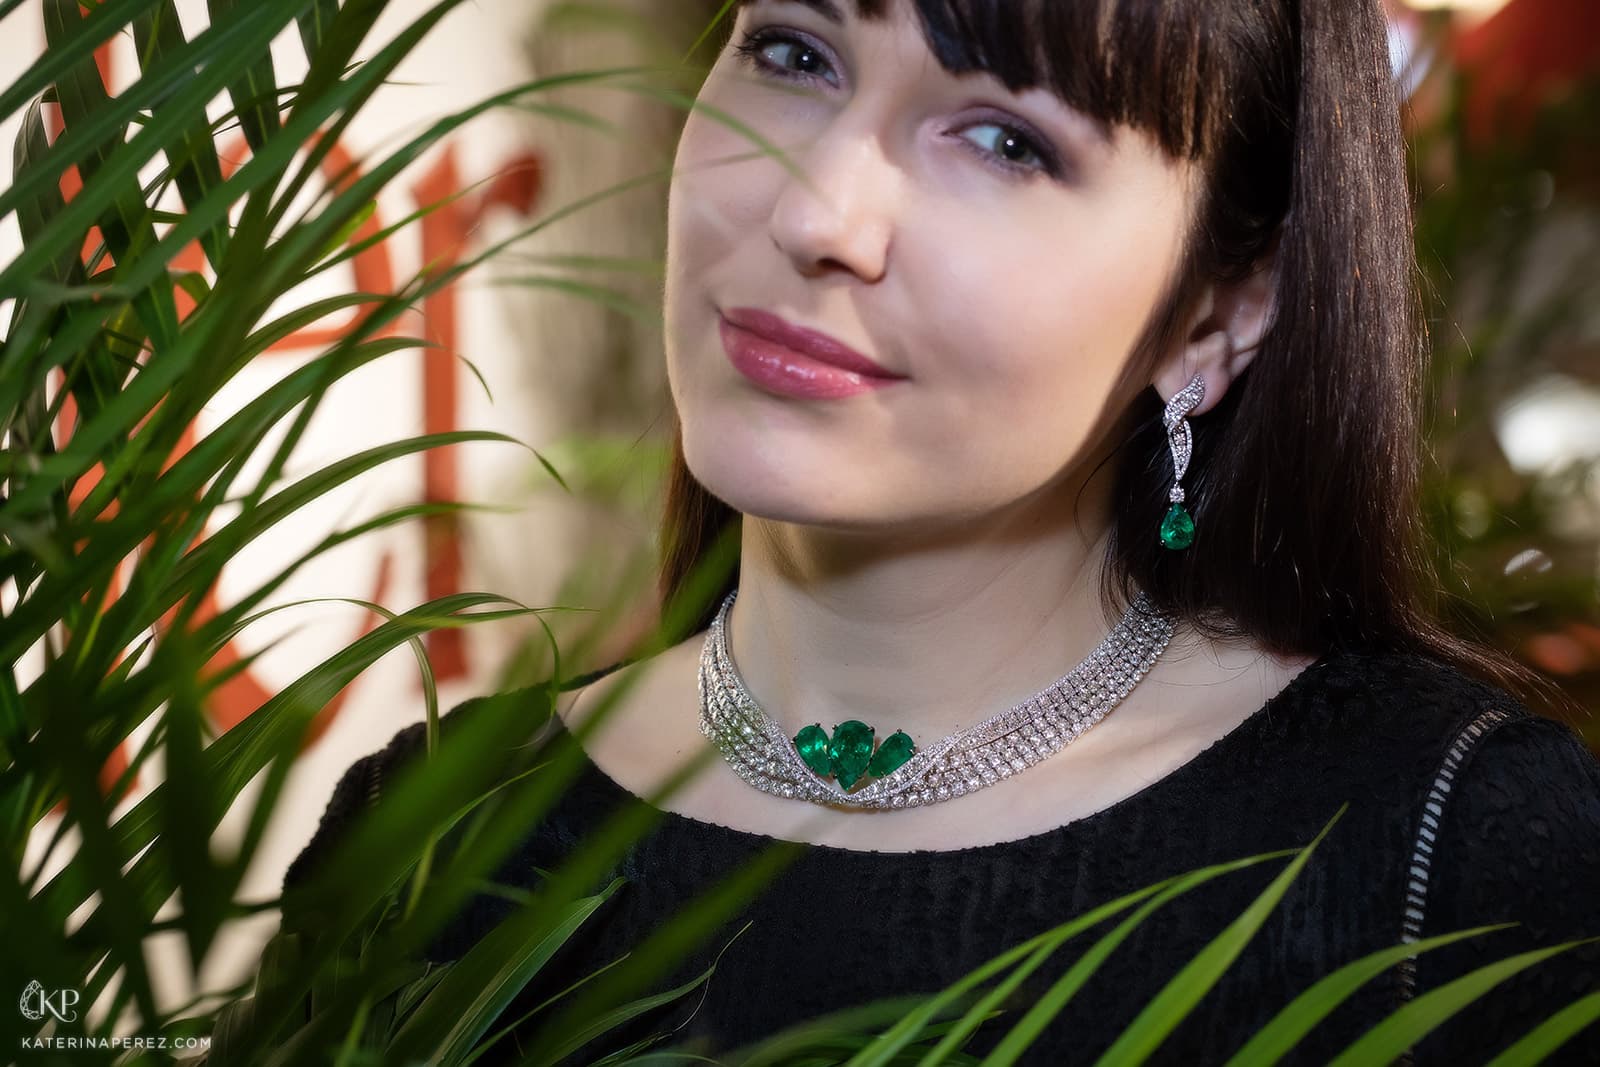 Adler necklace and earrings, both with pear cut emeralds and brilliant cut diamonds in 18k white gold